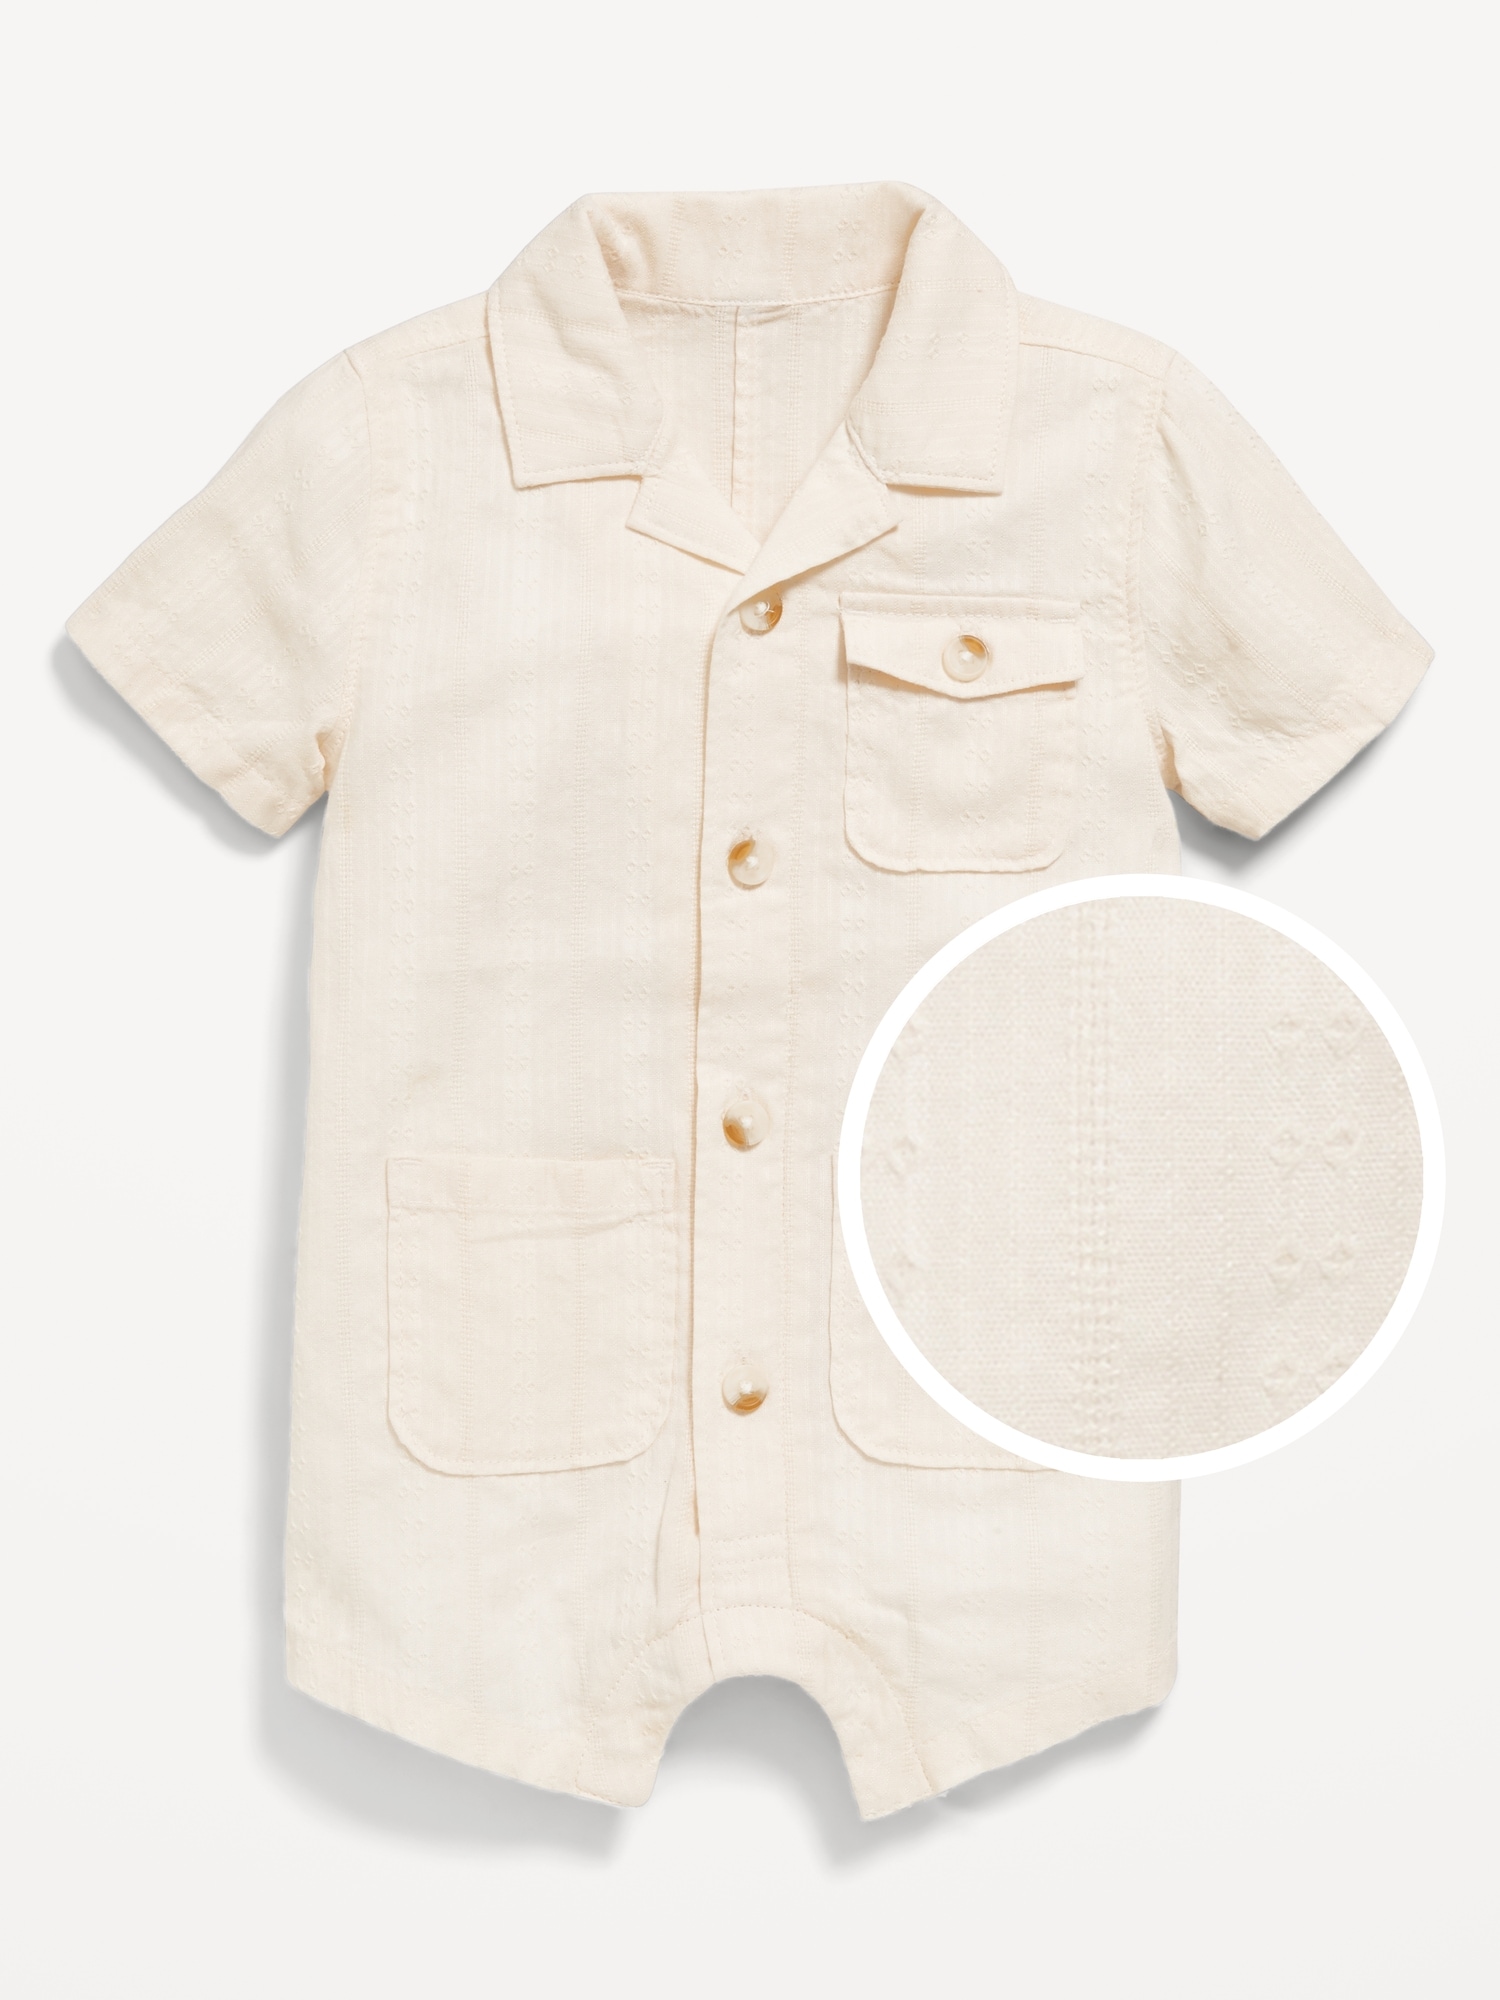 Textured Dobby Utility Pocket Romper for Baby Hot Deal